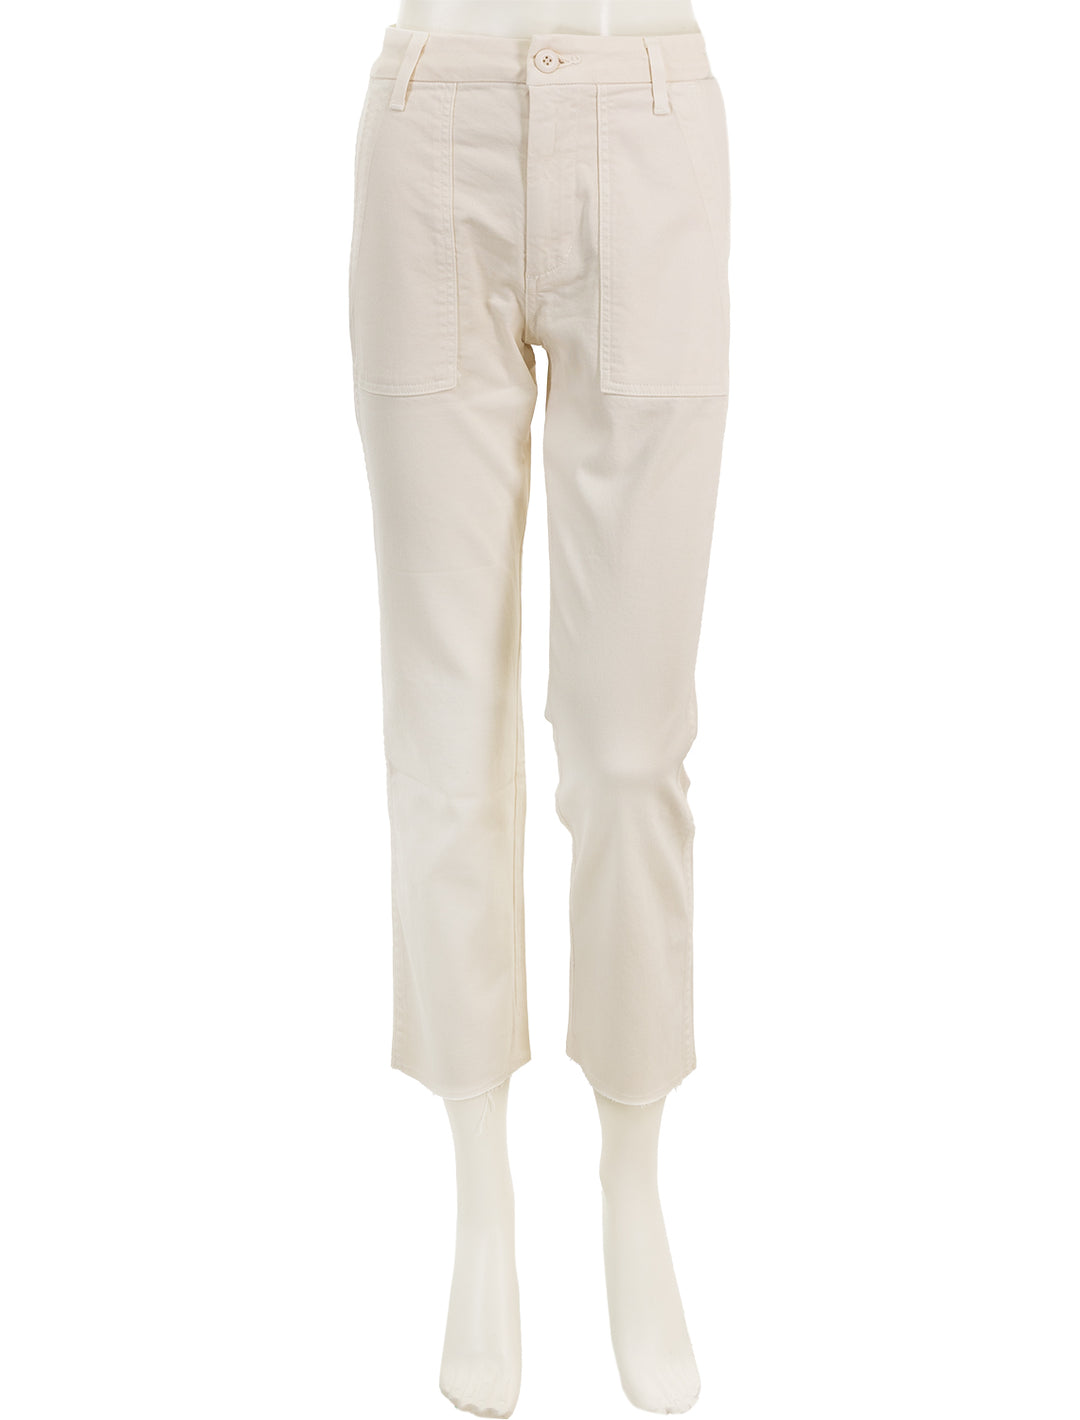 Front view of AMO's easy army trousers in bone.